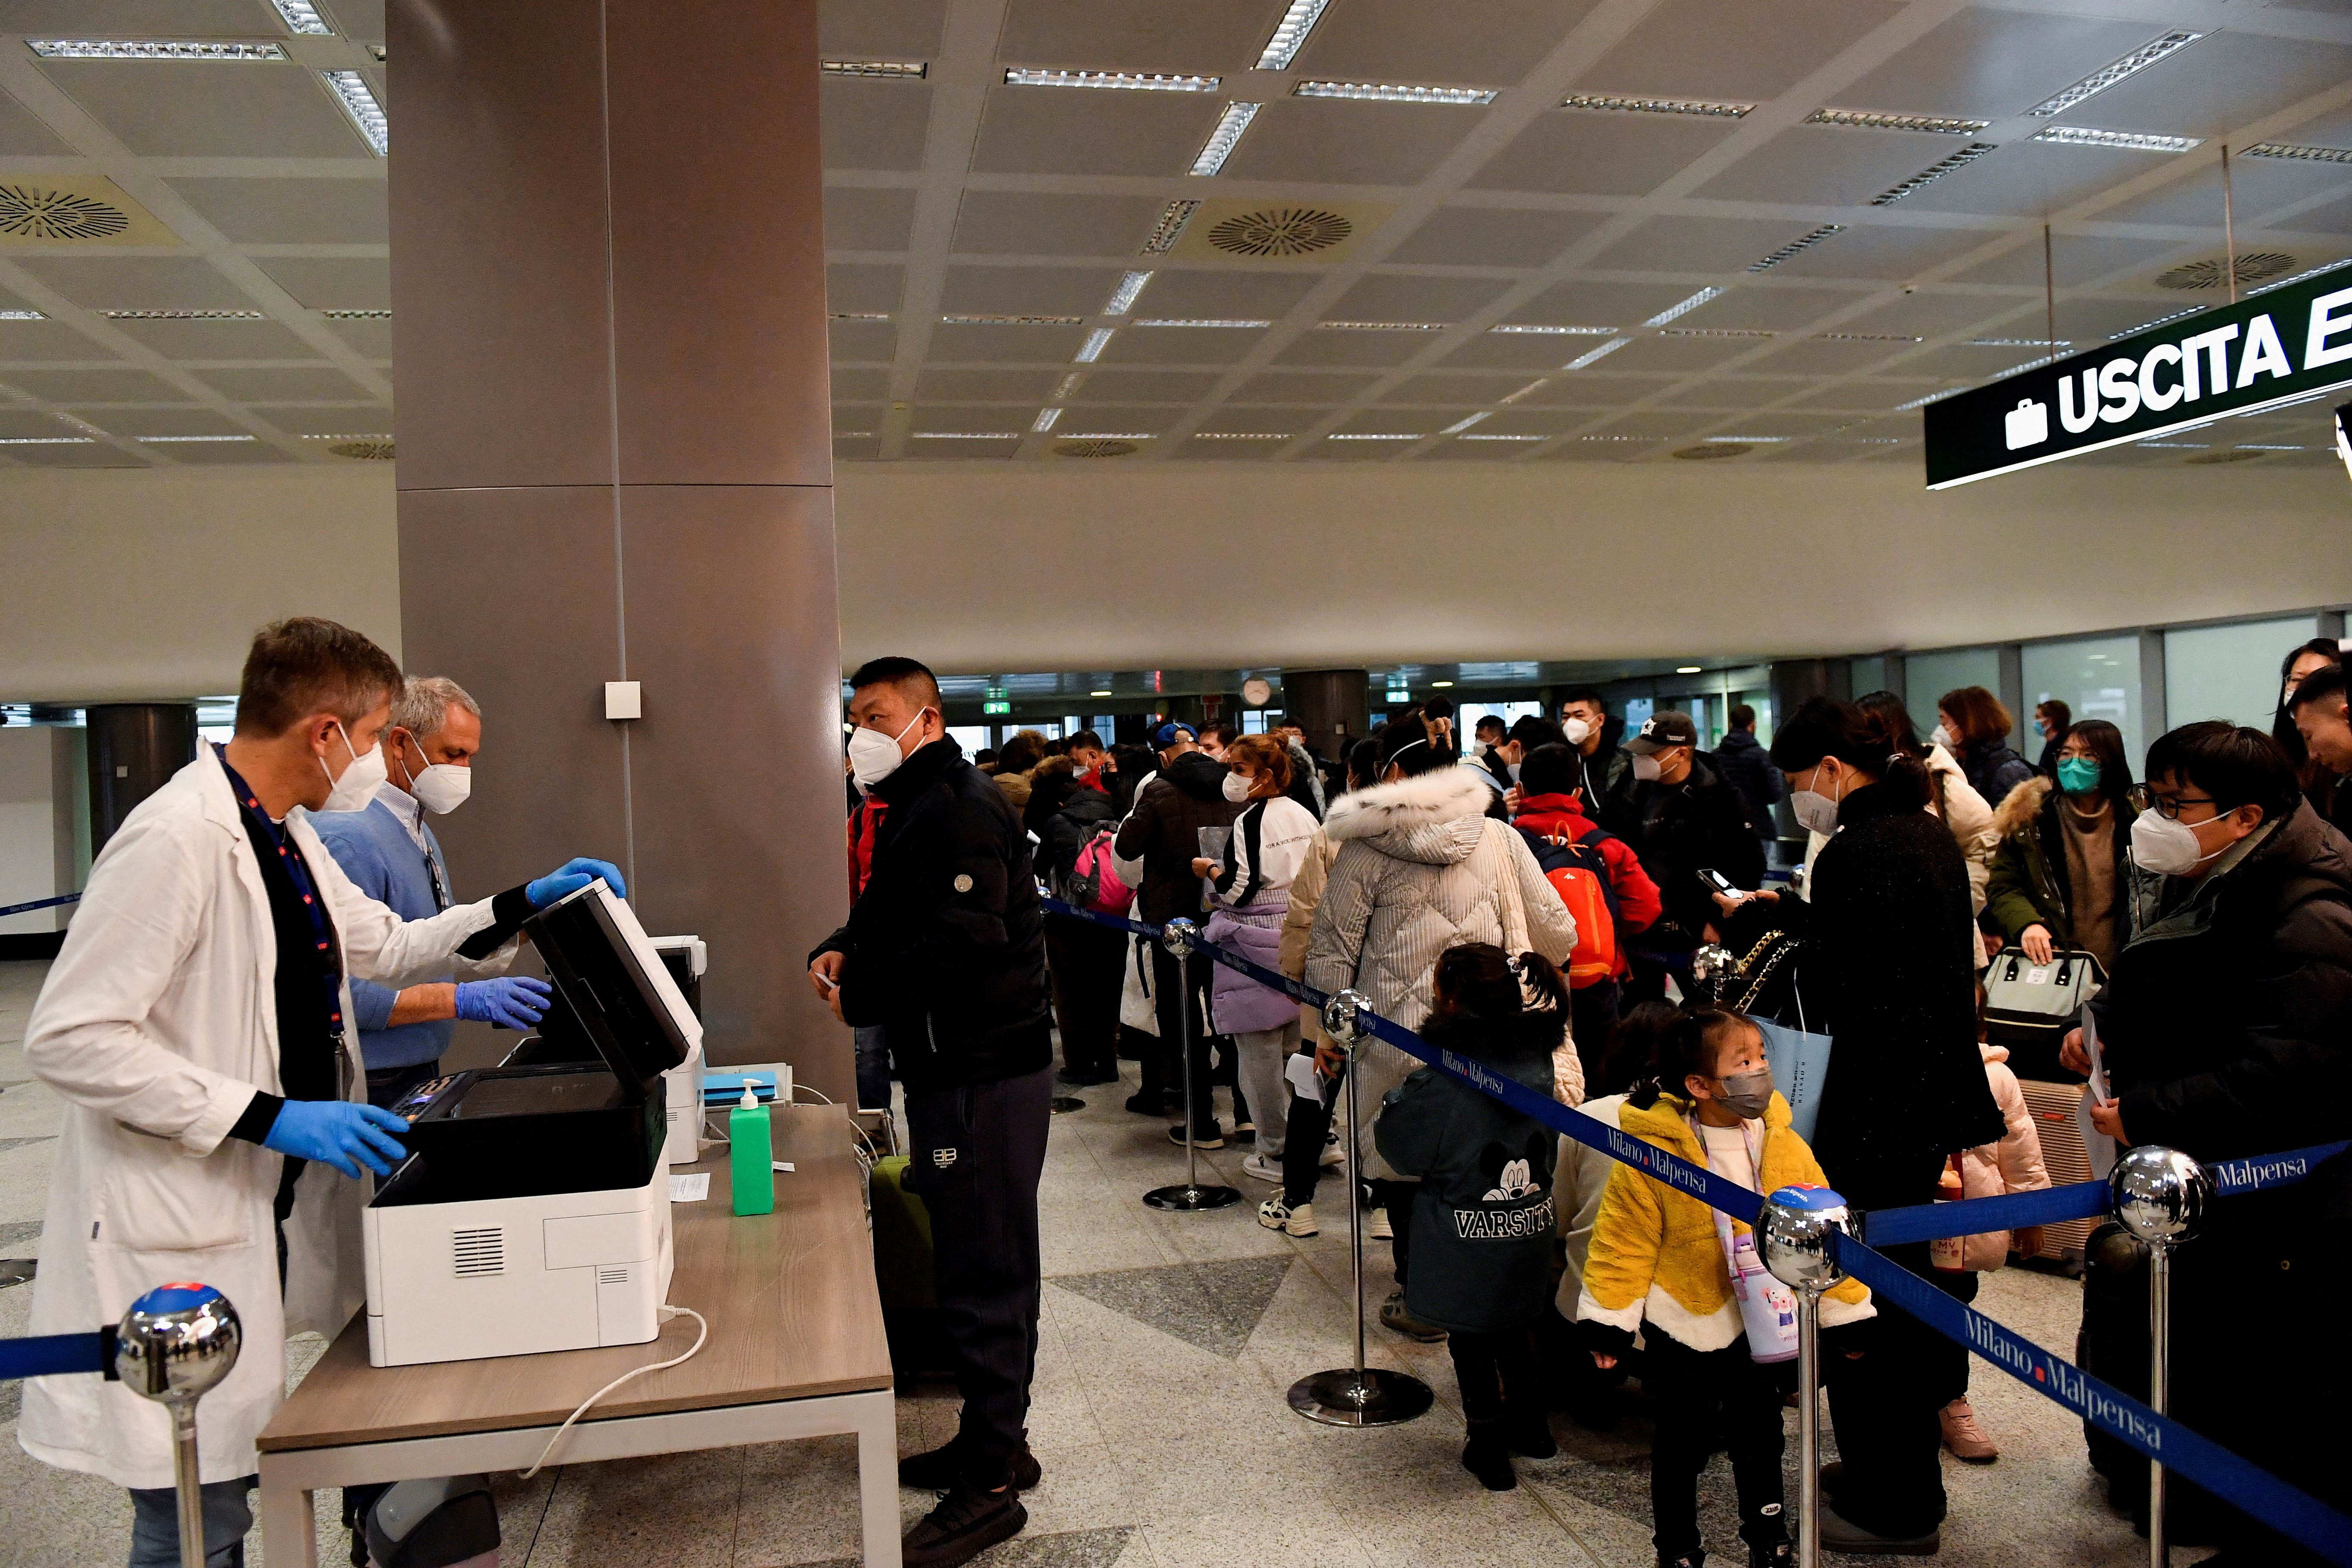 Italy imposes mandatory COVID-19 tests for travelers arriving from China